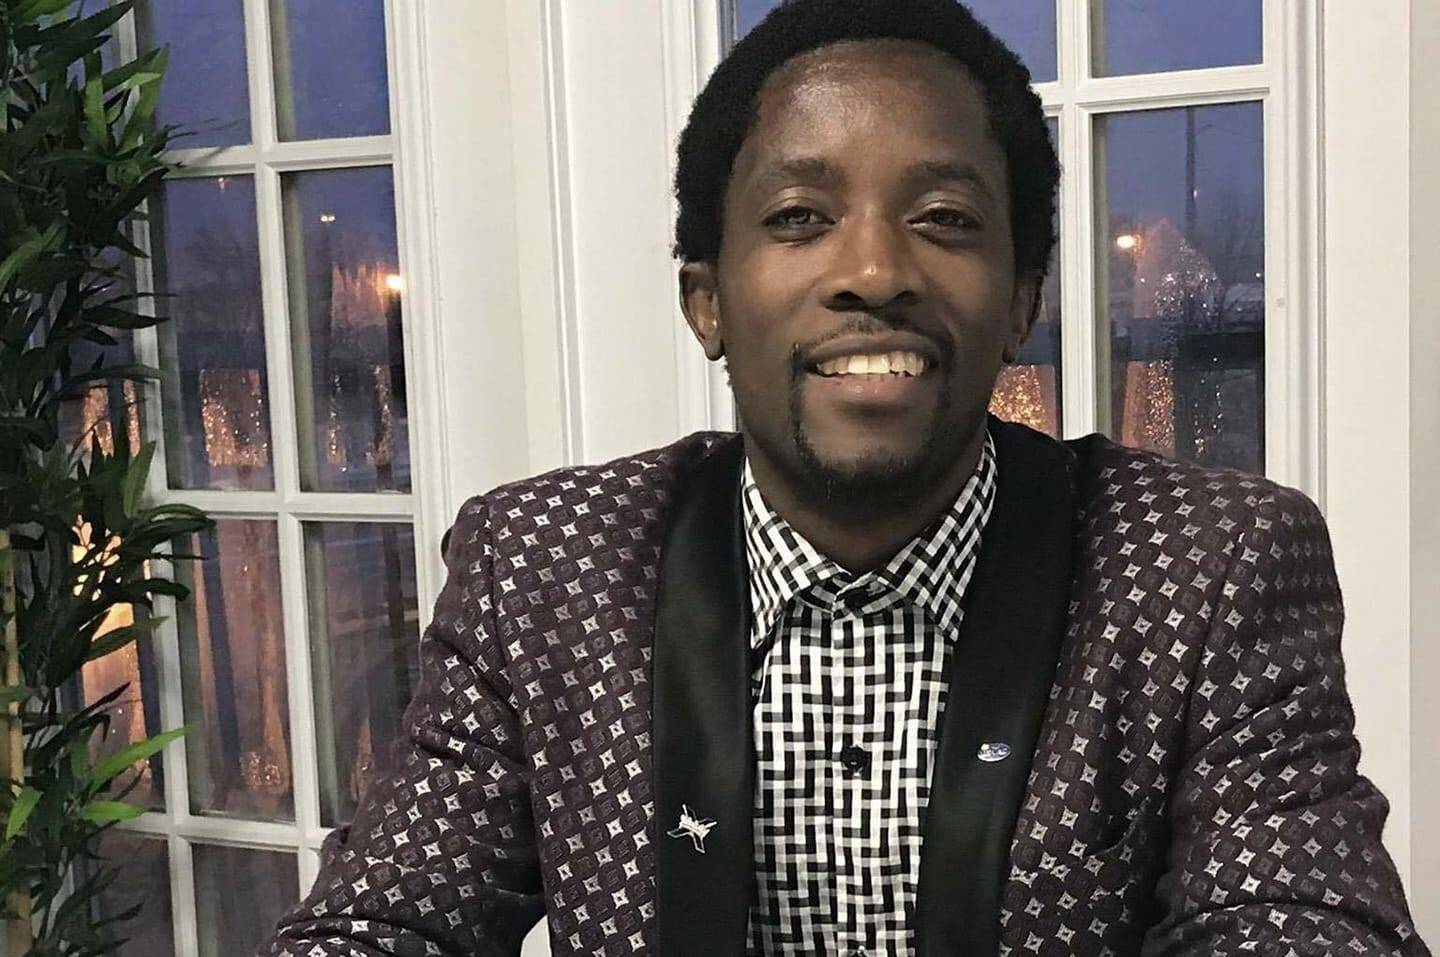 Yasin Kiraga Misago is the founder of the African Descent Society of B.C. He came to Canada as a refugee in 2009 from Uganda and Malawi and has been celebrating Kwanzaa with his community since. (Submitted)